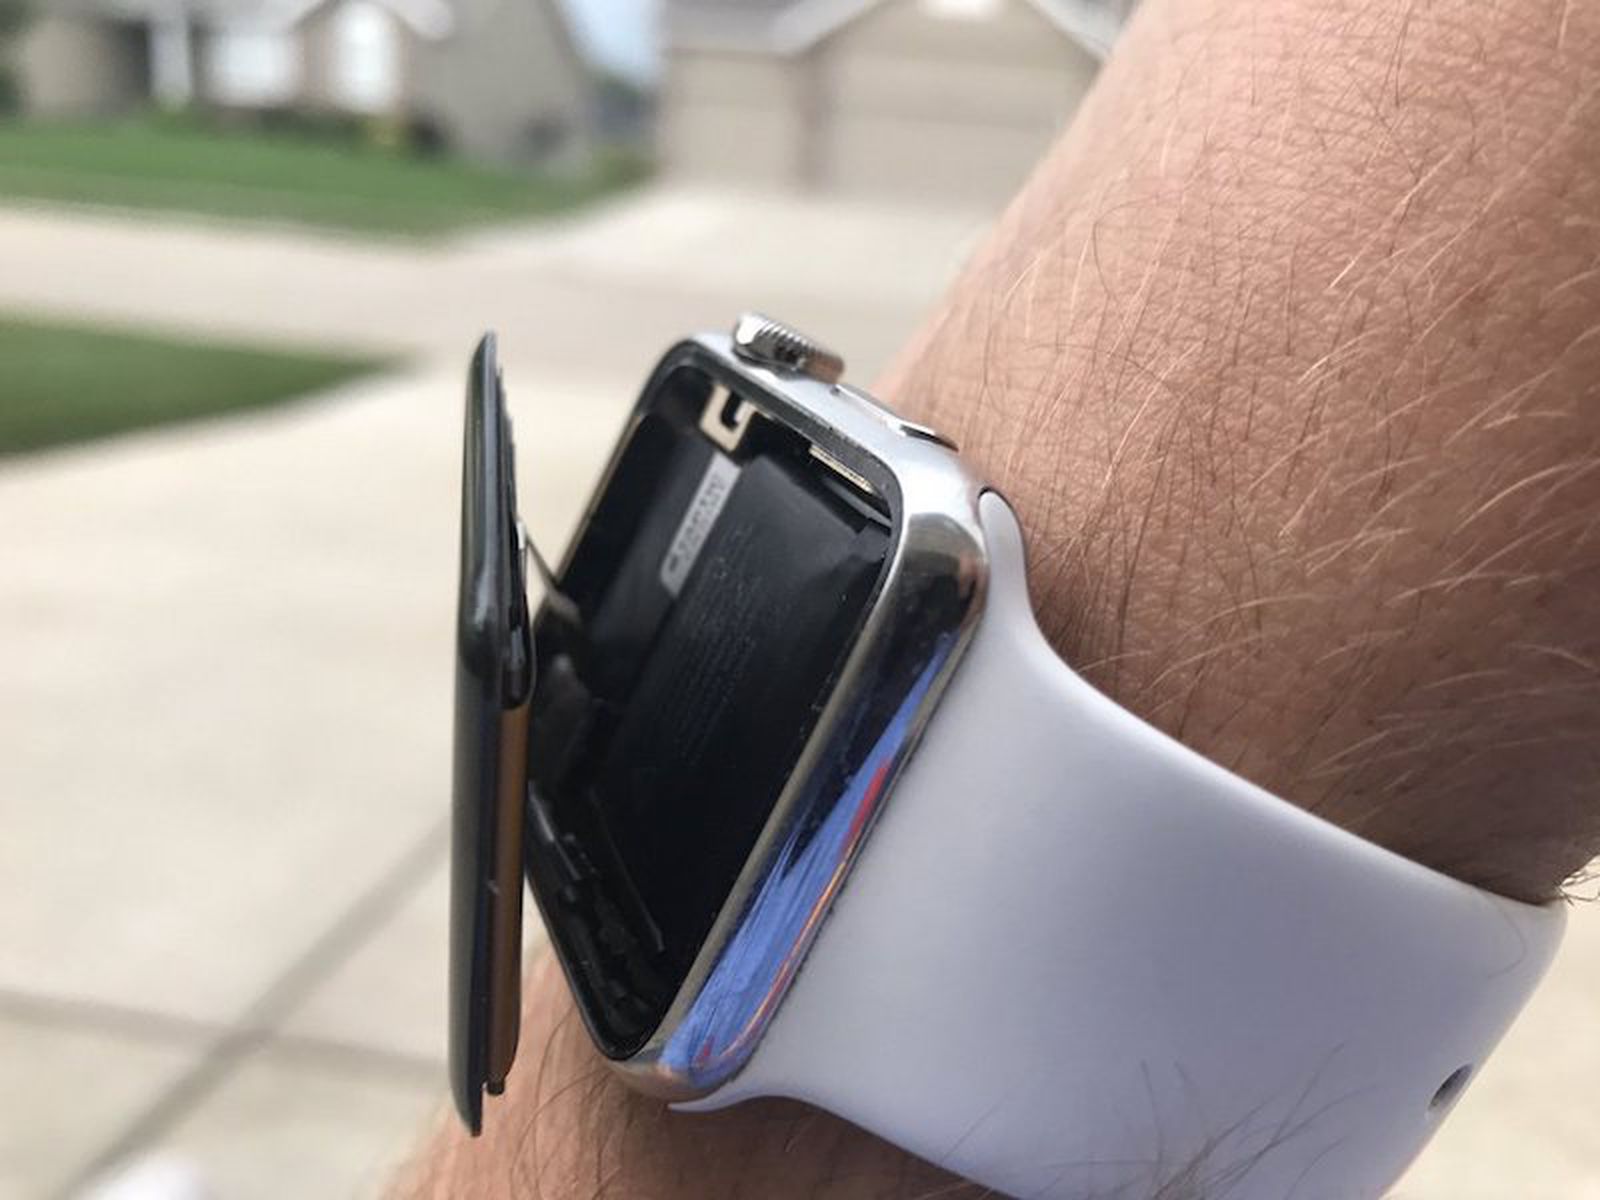 Lawsuit Claims Swollen Apple Watch Batteries Can Lead to 'Substantial Personal I..